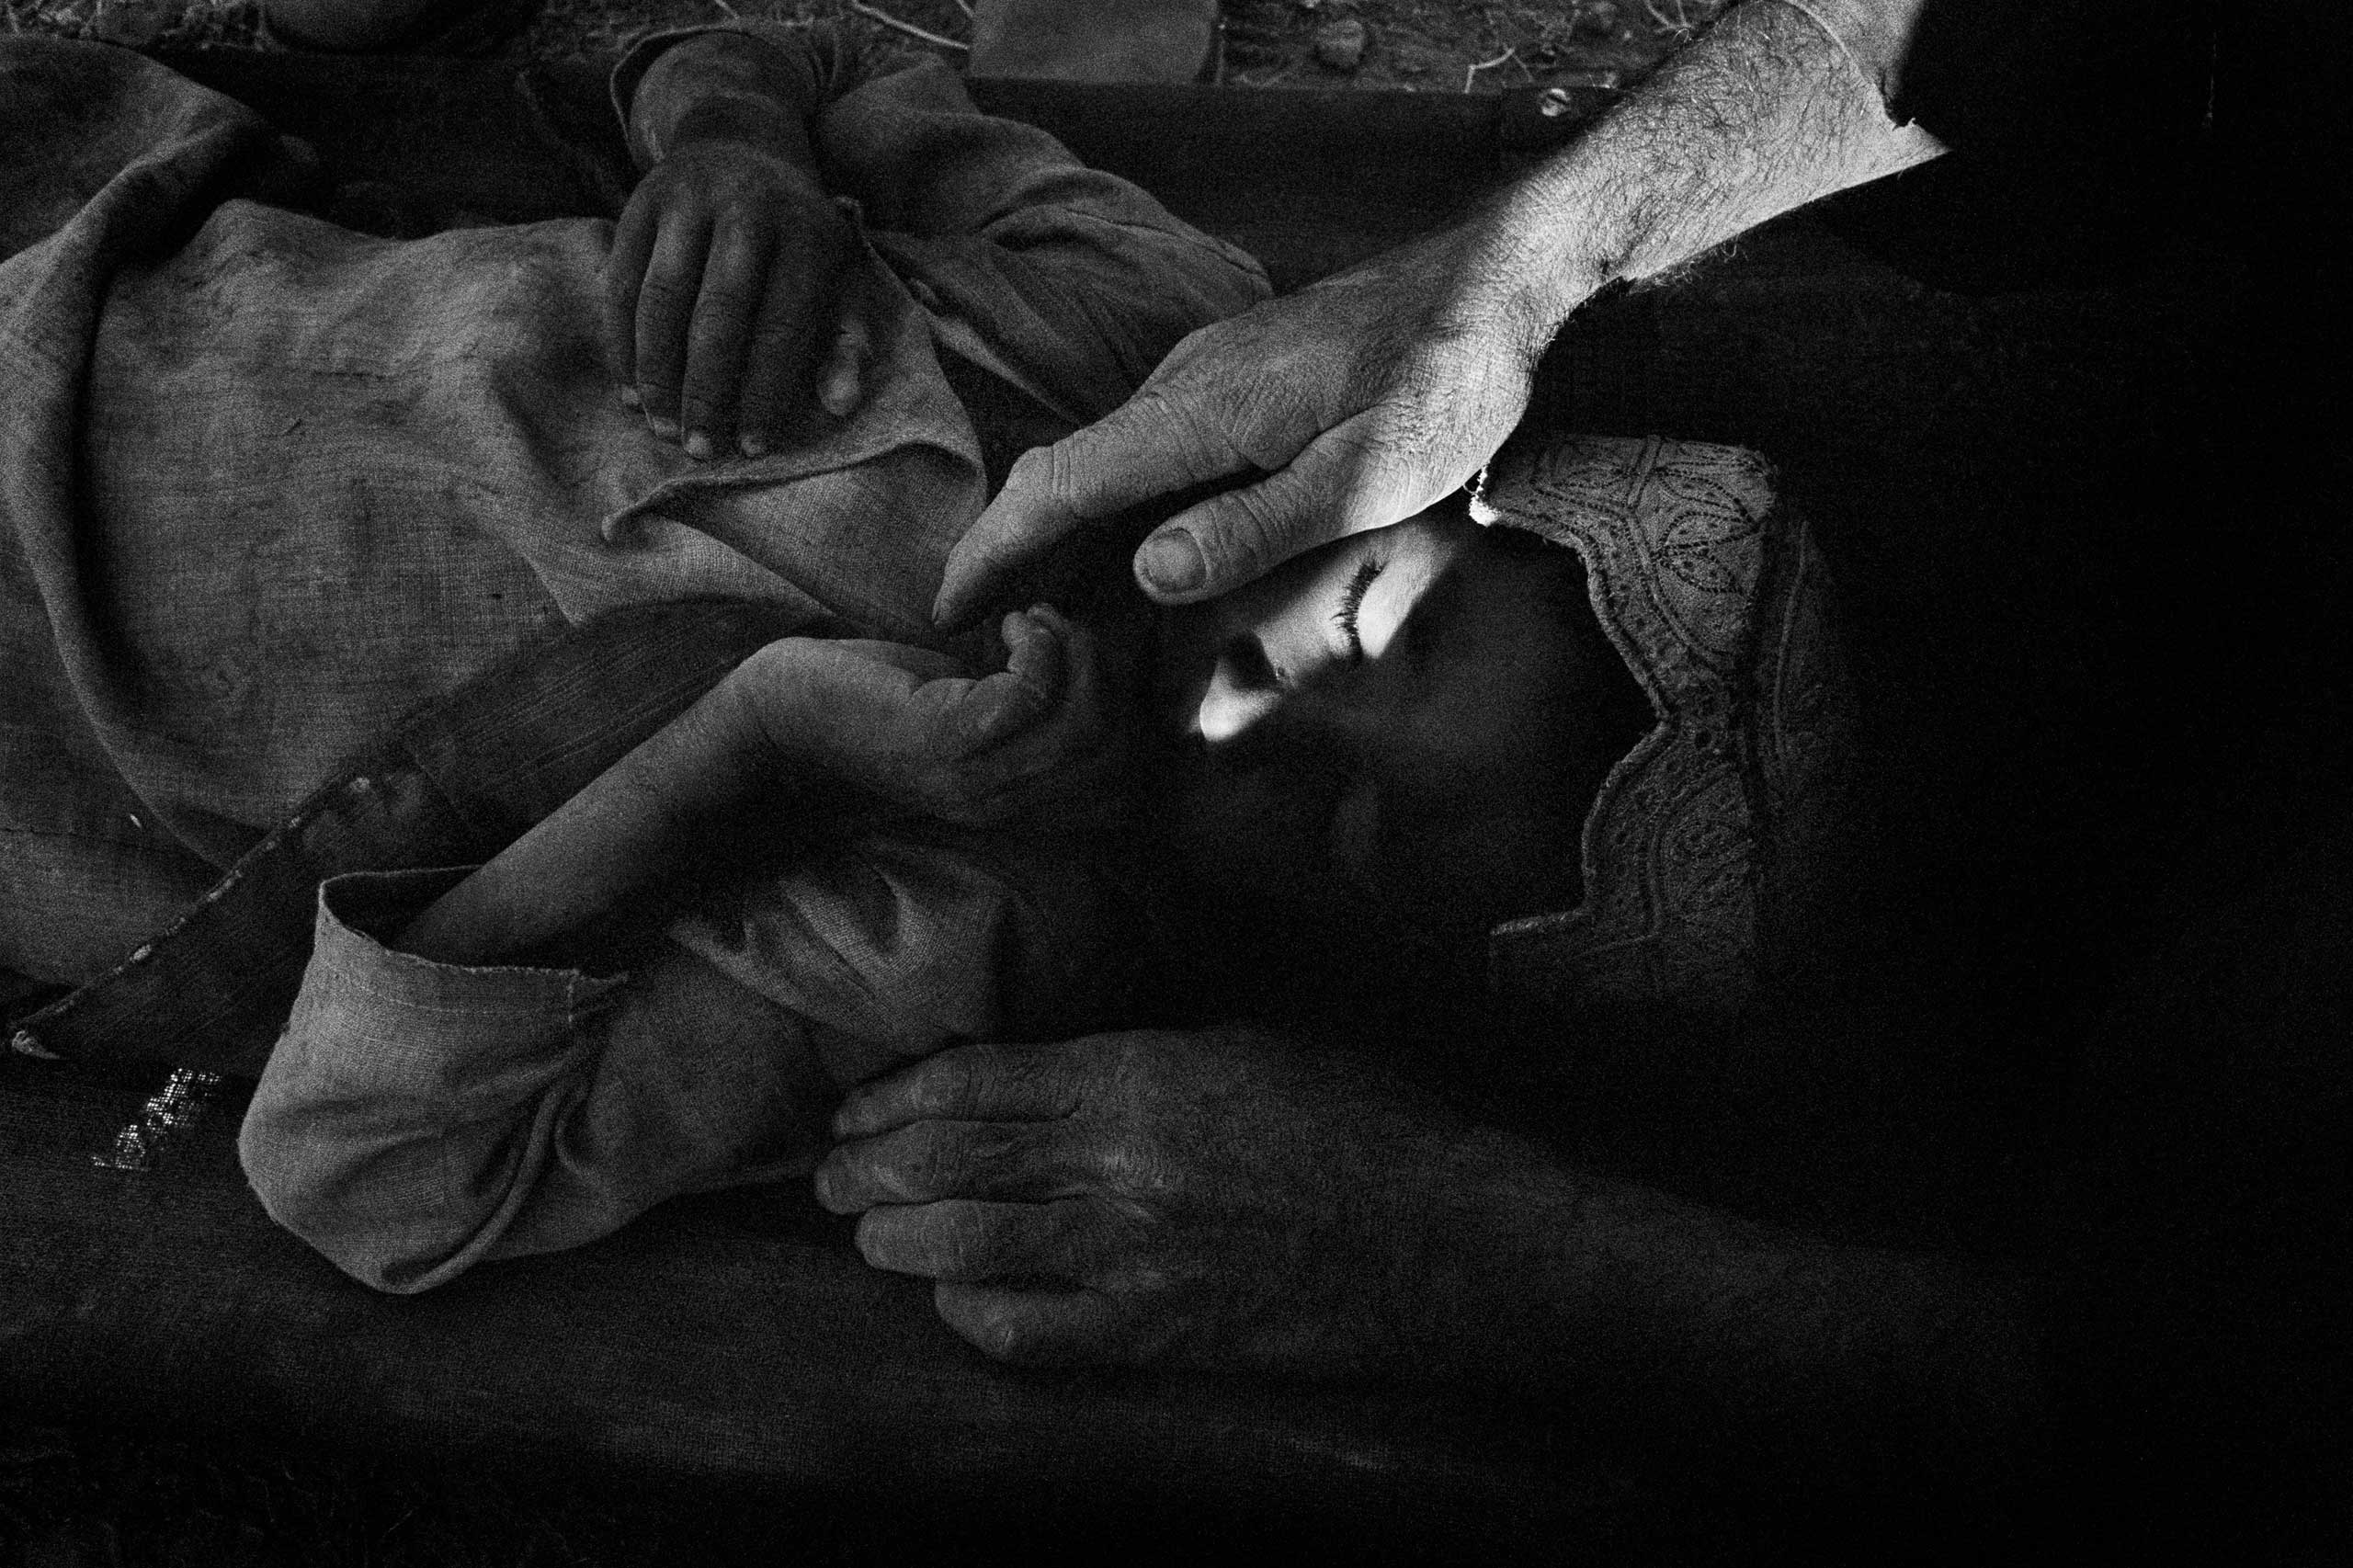 A wounded Afghan boy who had been shot in crossfire during a battle between US soldiers and Taliban in Gonbaz village, Kandahar Province, Oct. 1, 2005.